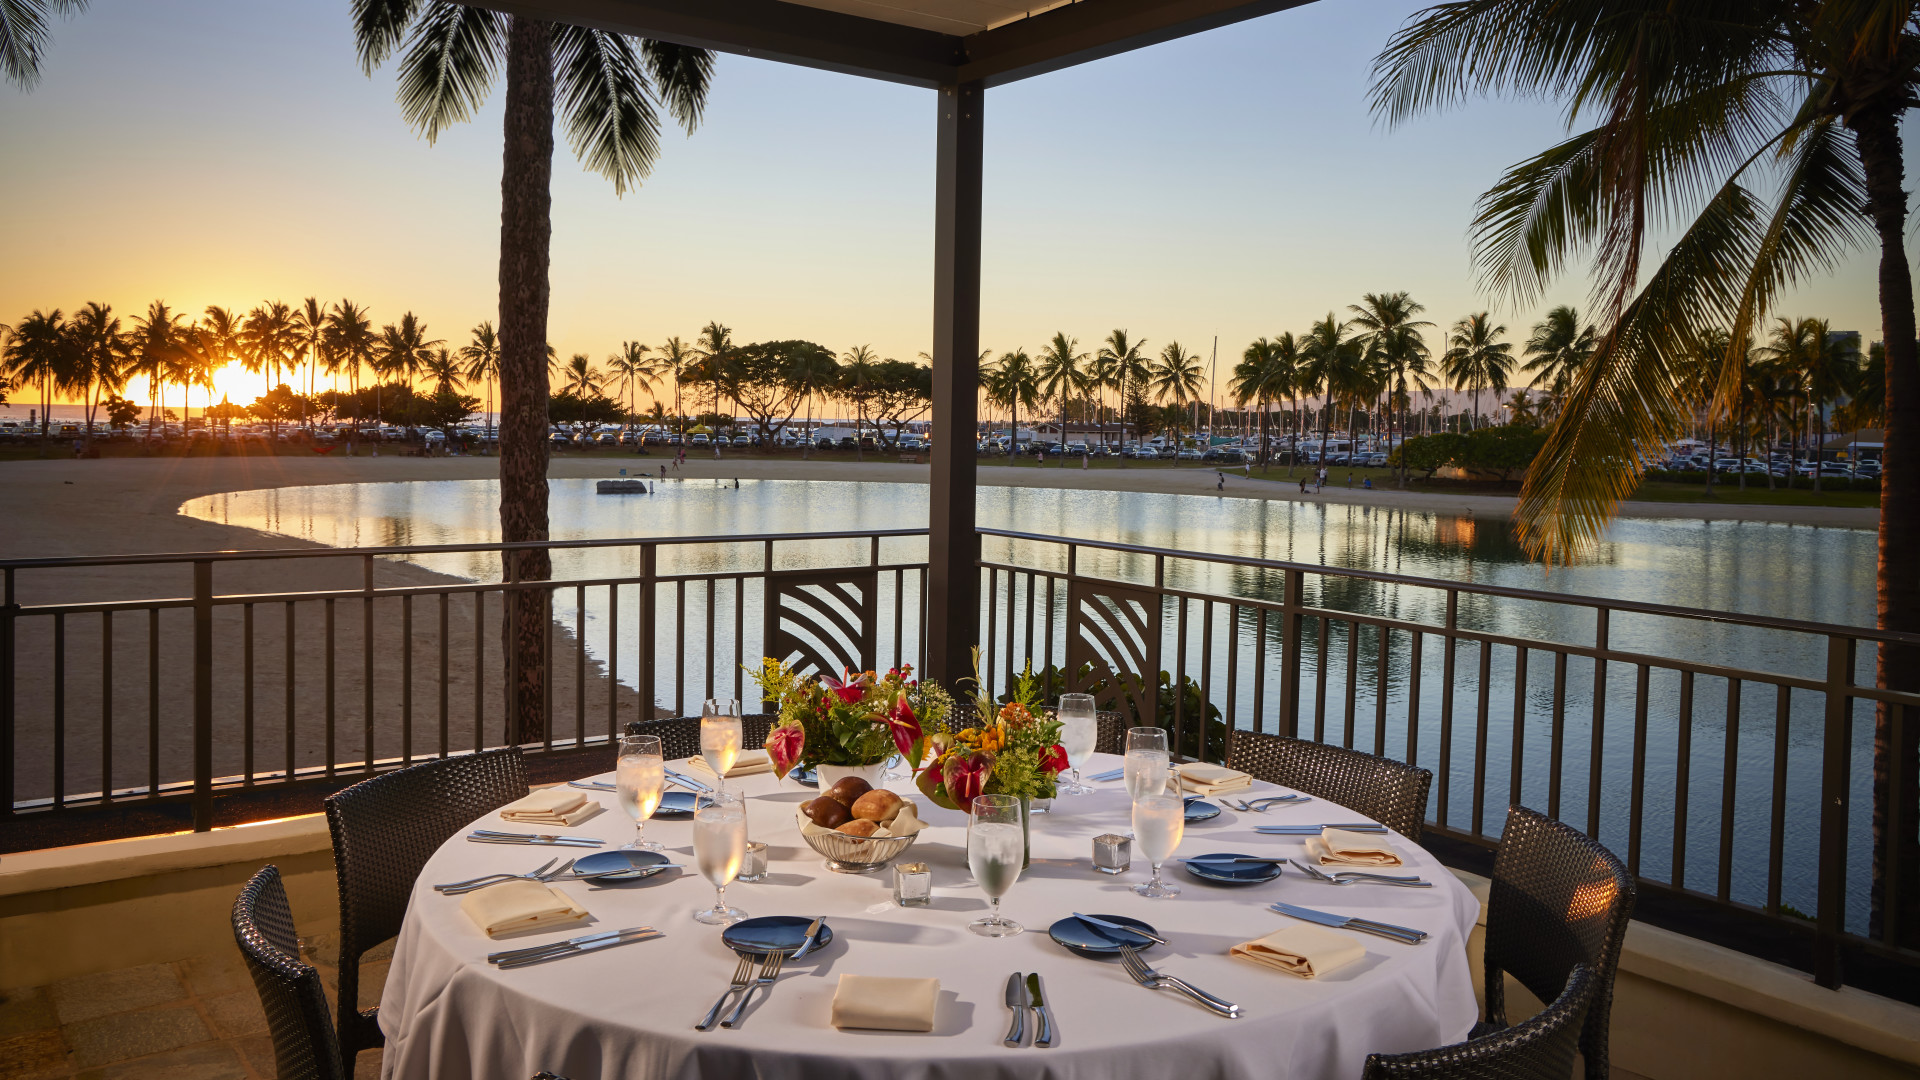 Table Setup for Dining with Ocean View-transition-image